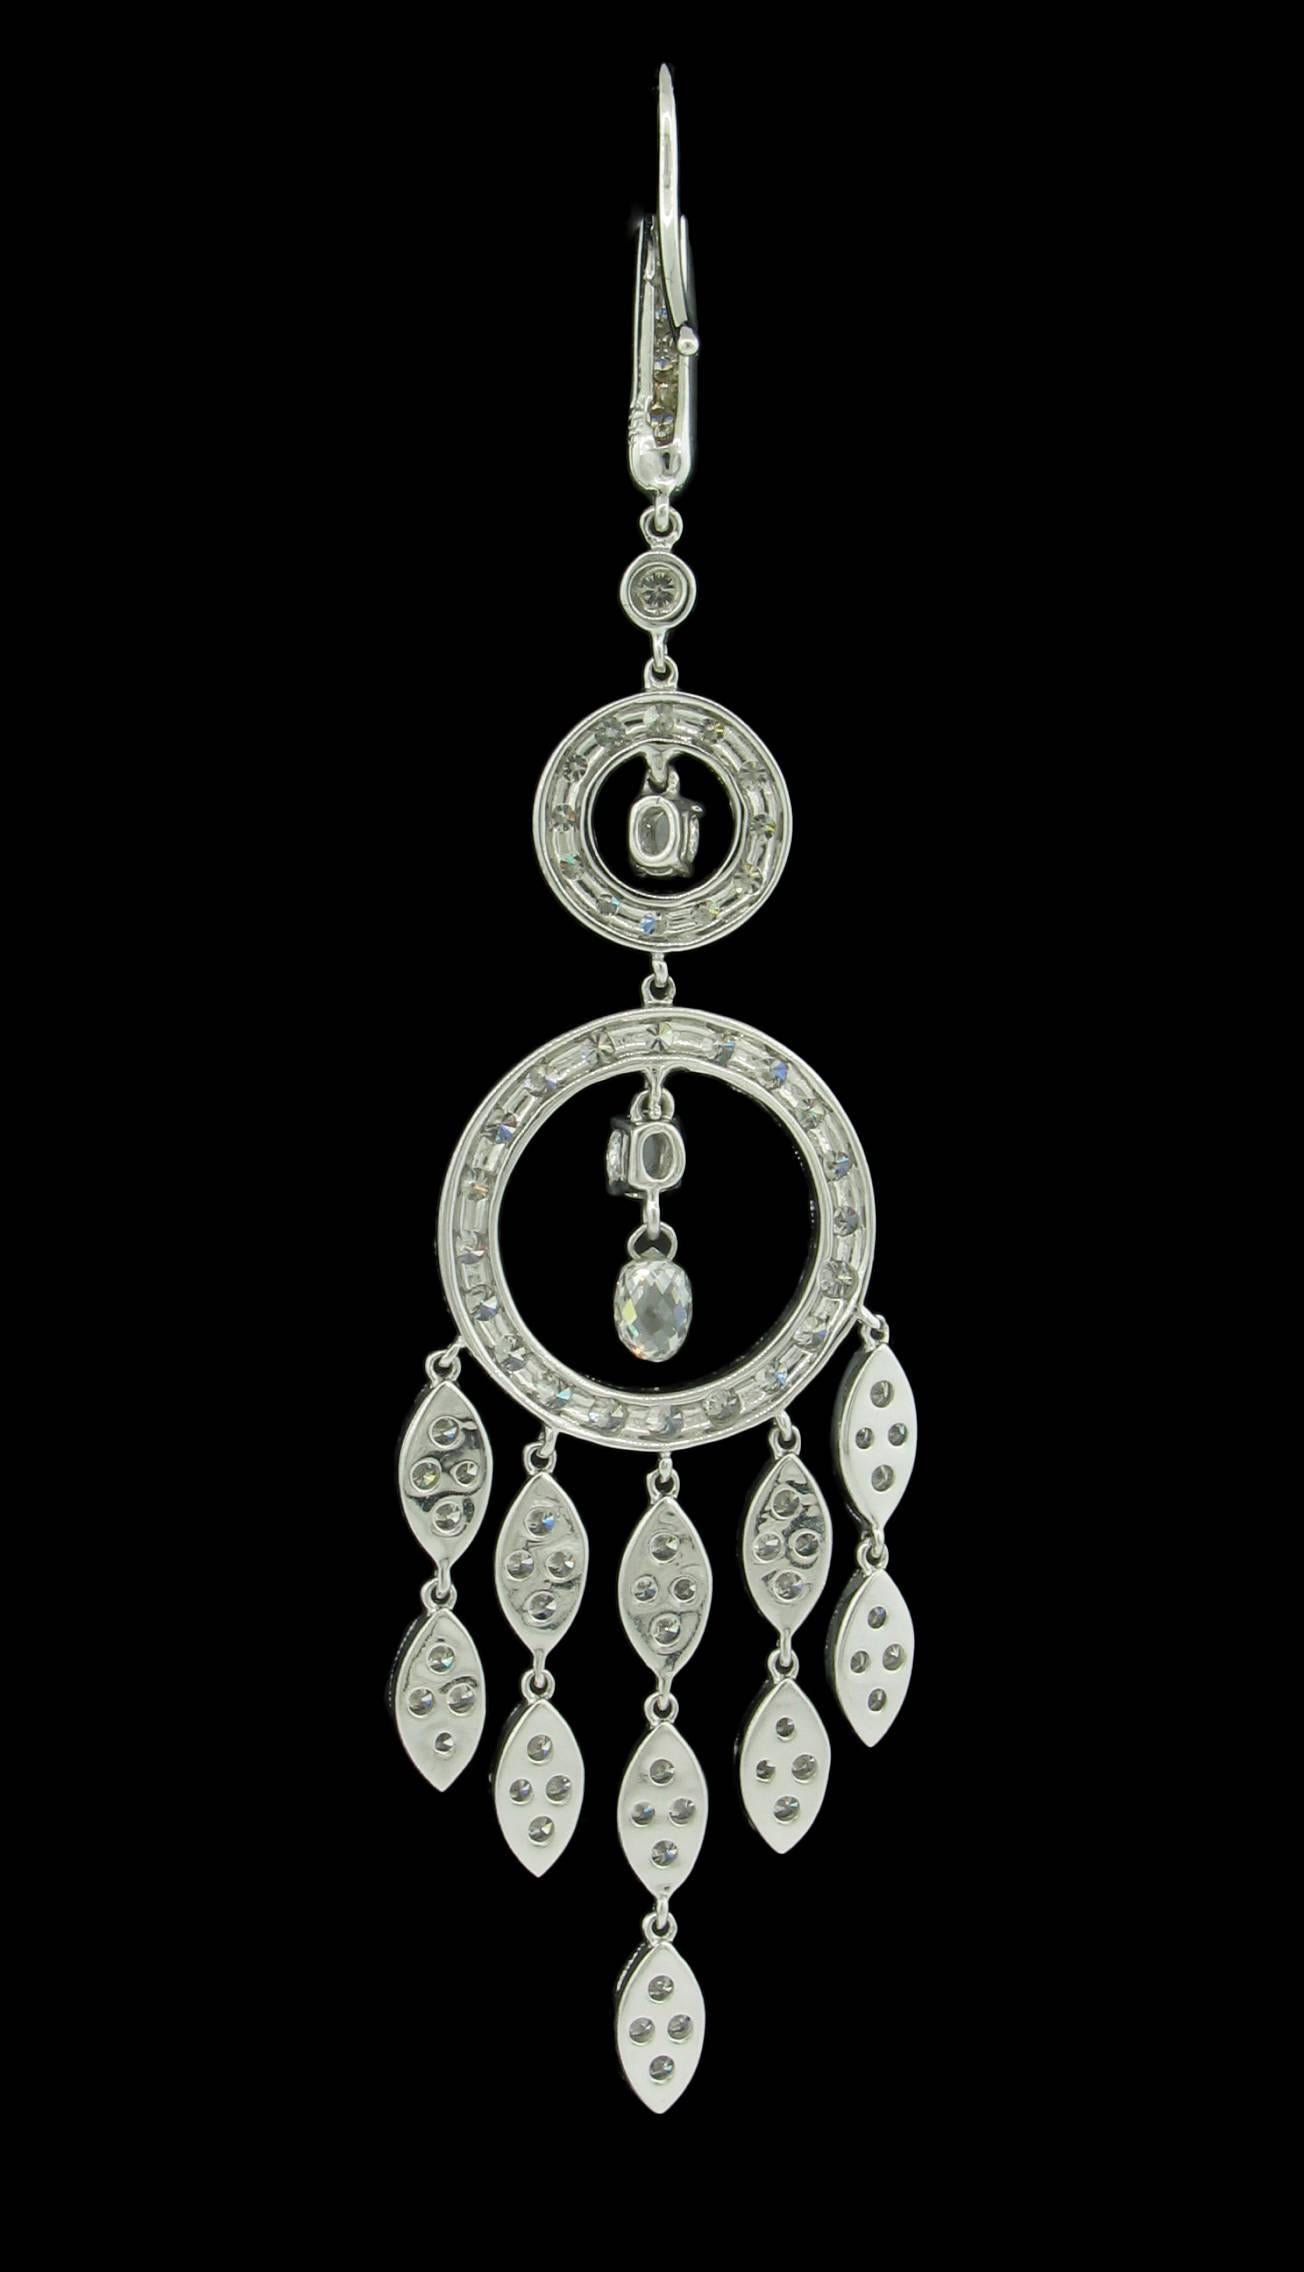 These Diamond earrings feature a chandelier design with two circles, the larger of which is attached with 5 articulated marquis shaped 'streamers' of diamonds.  Suspended inside the larer circle are  briolette cut diamonds.   148 Round Brilliant